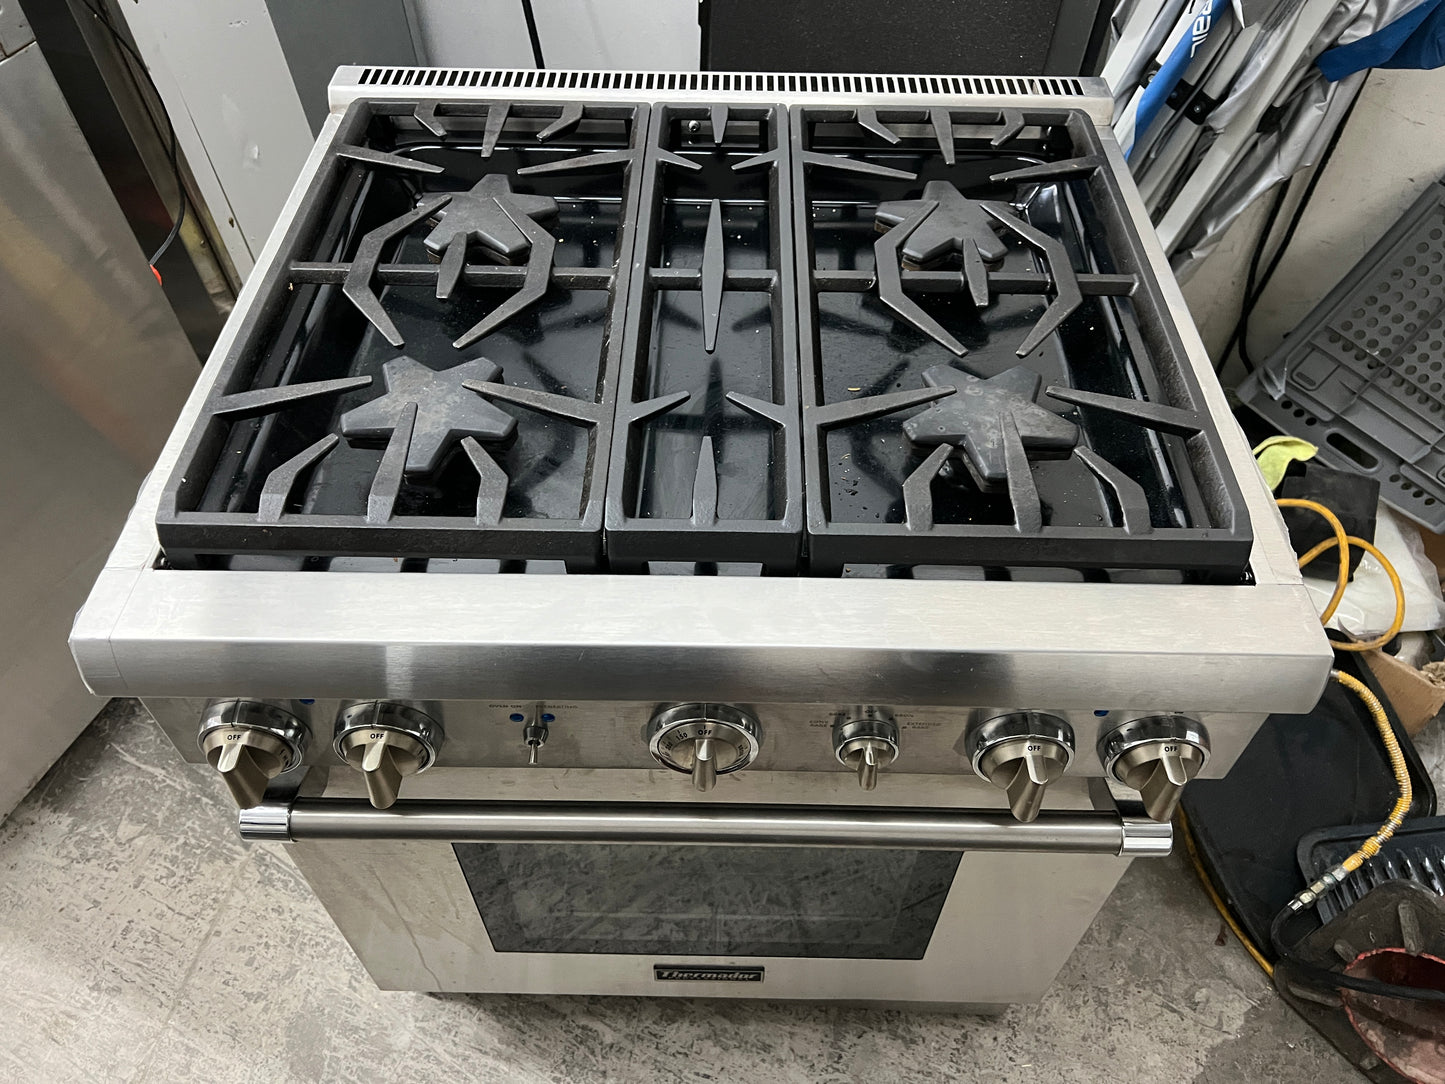 Thermador Pro Harmony Professional Series  PRG304GH 30 Inch Pro-Style Gas Range with 4.5 cu. ft. Convection Oven, 4 Sealed Star Burners, Continuous Grates, ExtraLow Simmer Feature, Telescopic Rack, Halogen Lighting and Sabbath Mode: Natural Gas, 369248